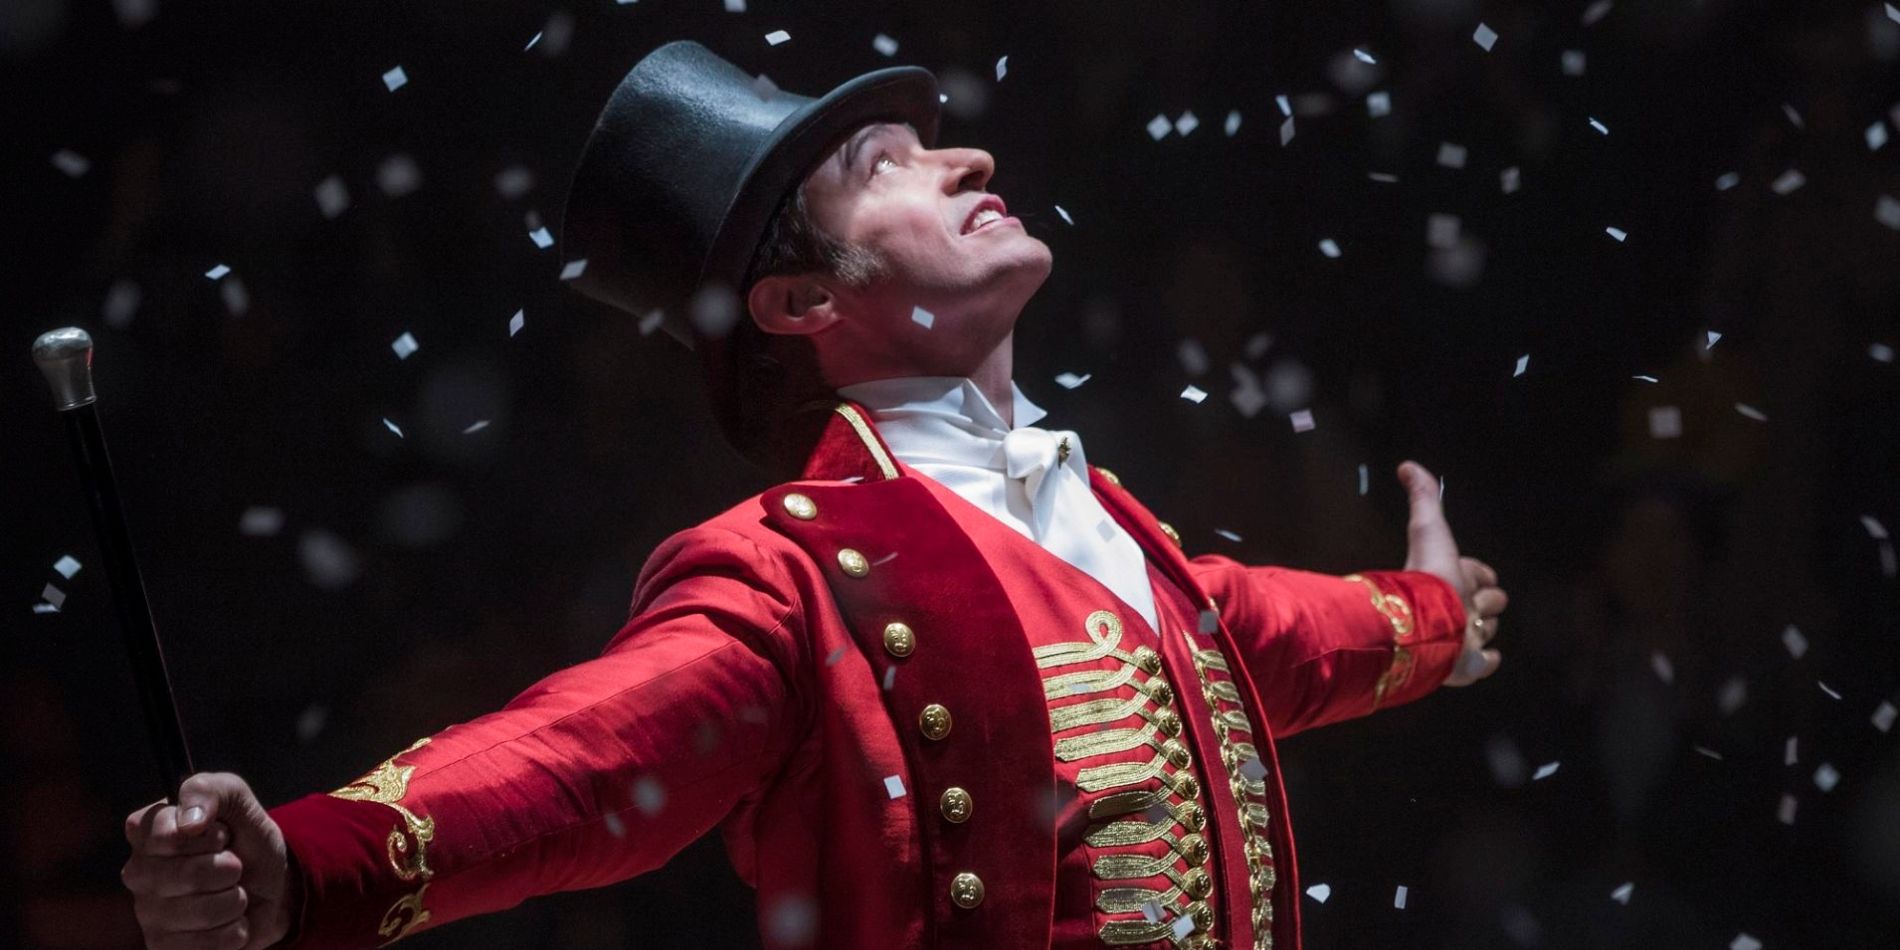 Hugh Jackman on stage as PT Barnum in The Greatest Showman